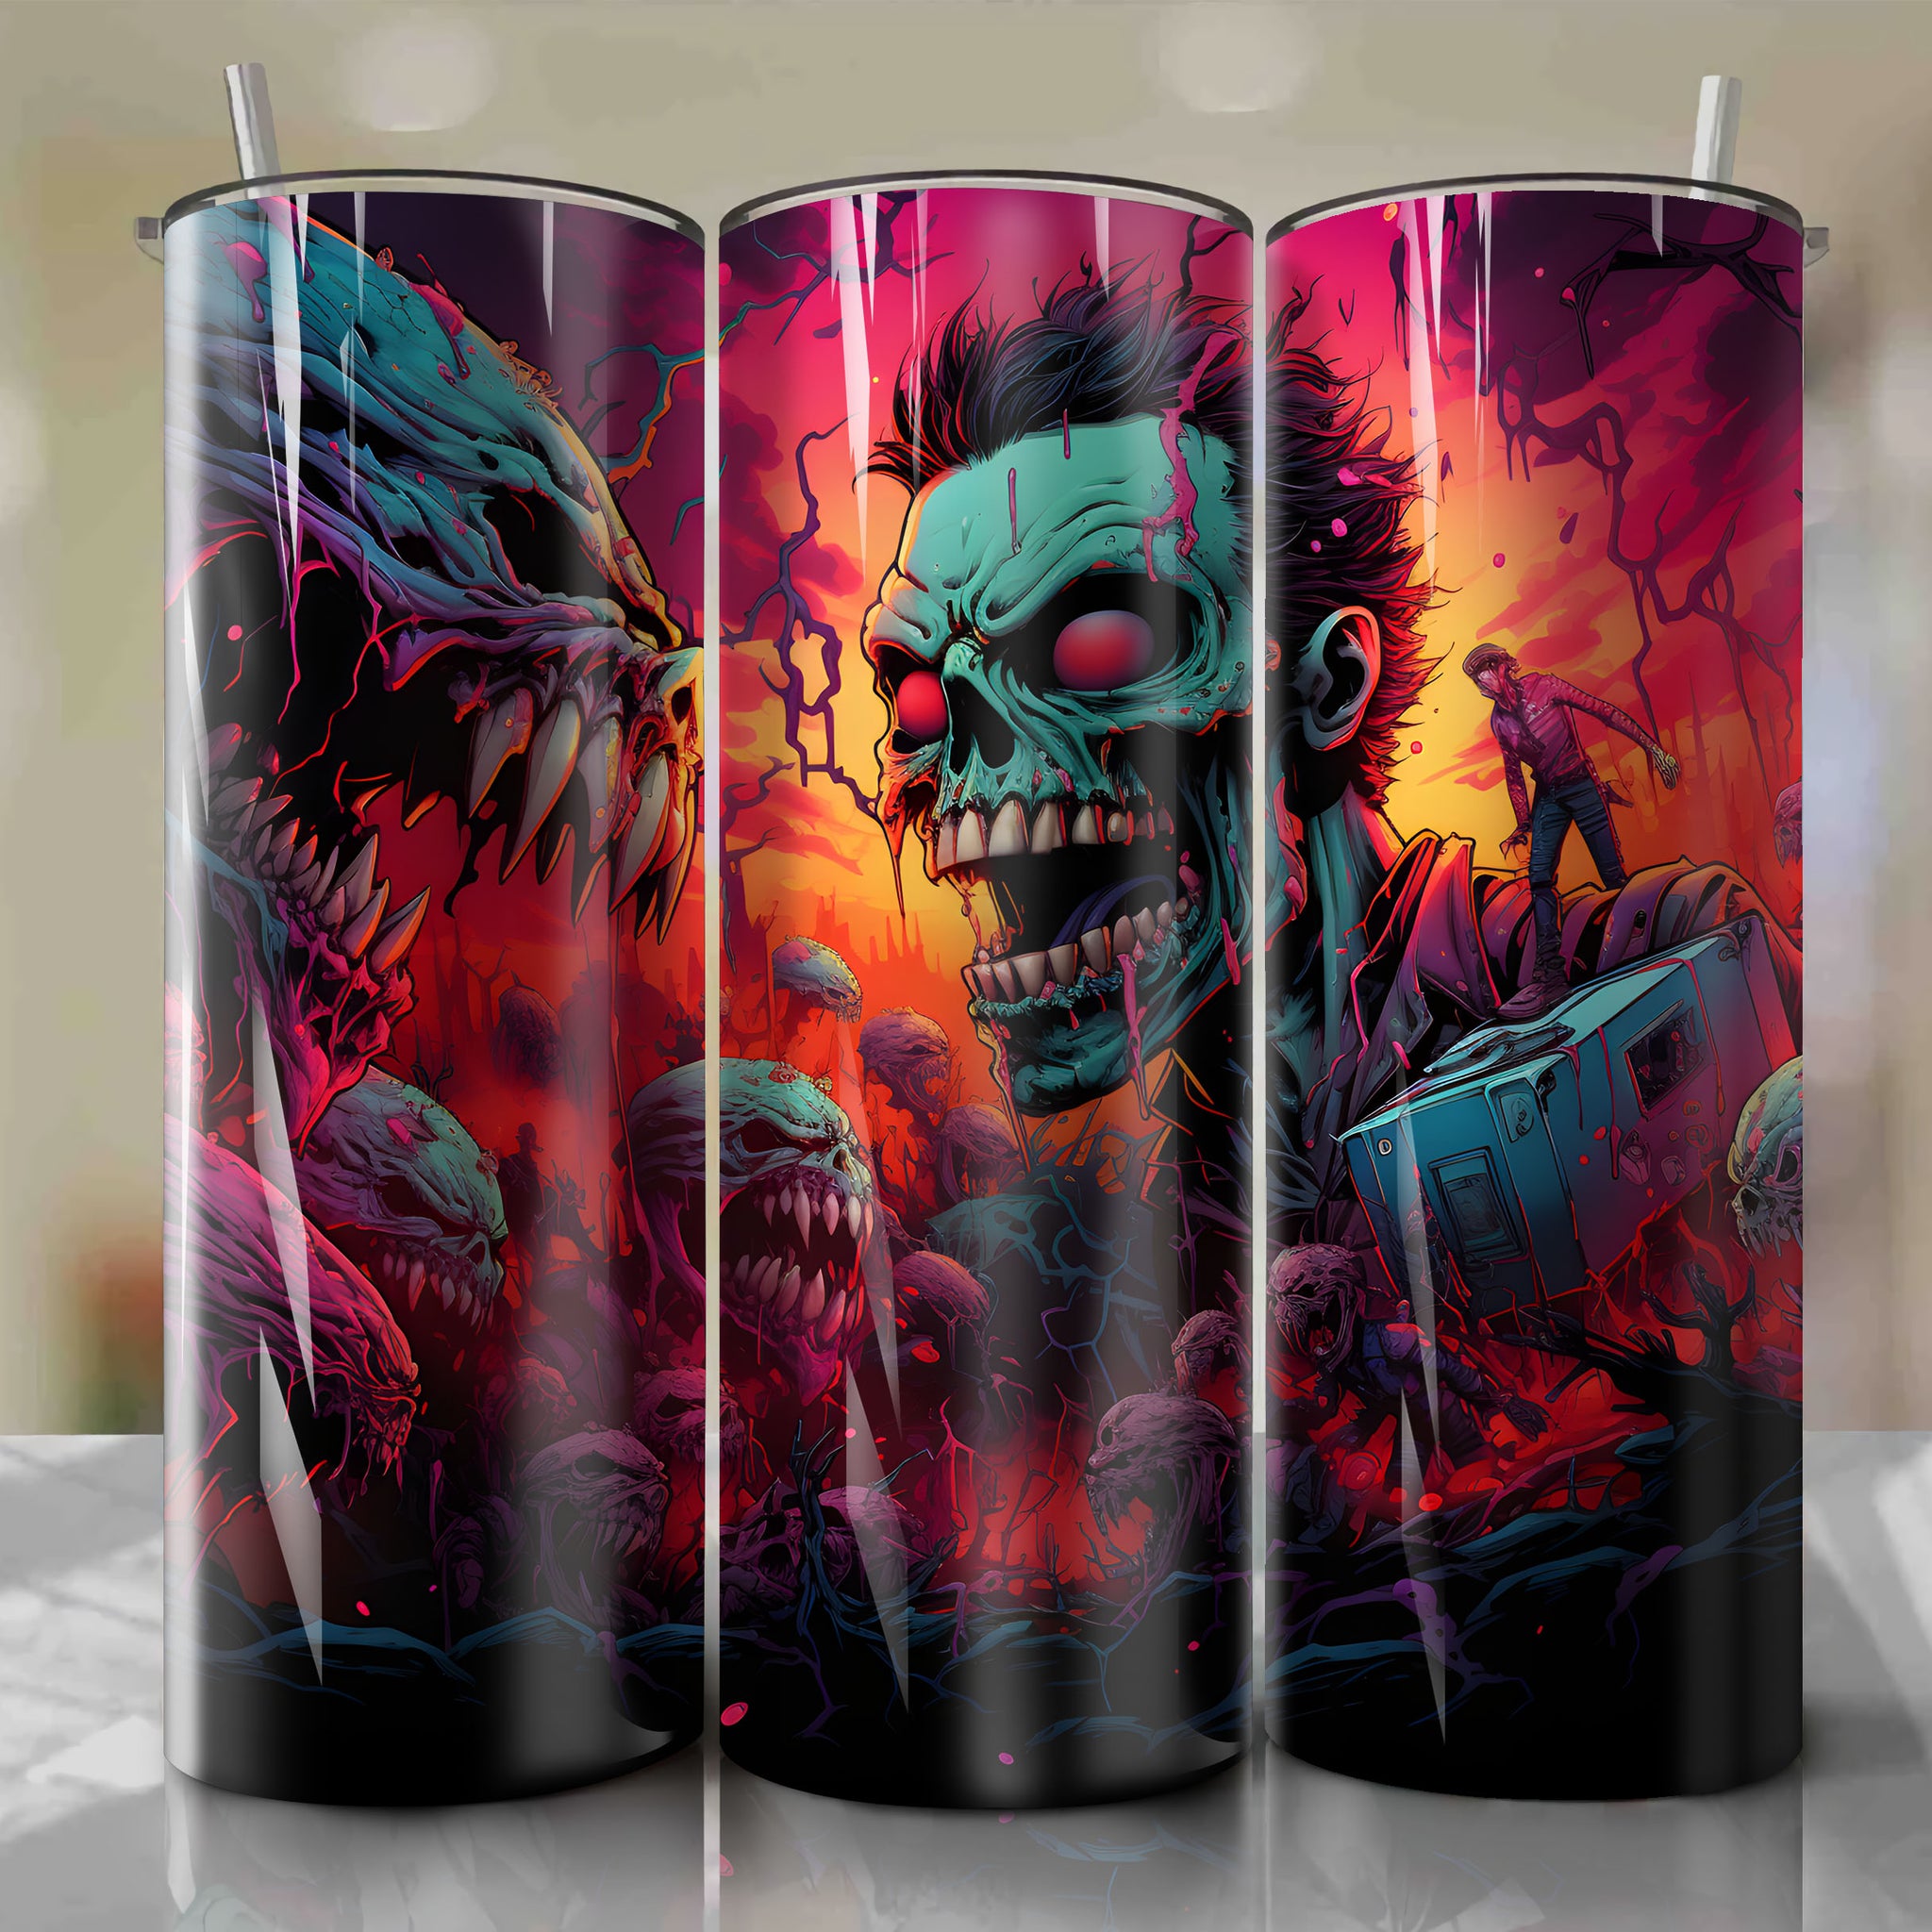 20 Oz Tumbler Wrap - Durable and Stylish Drinkware for Every Occasion
